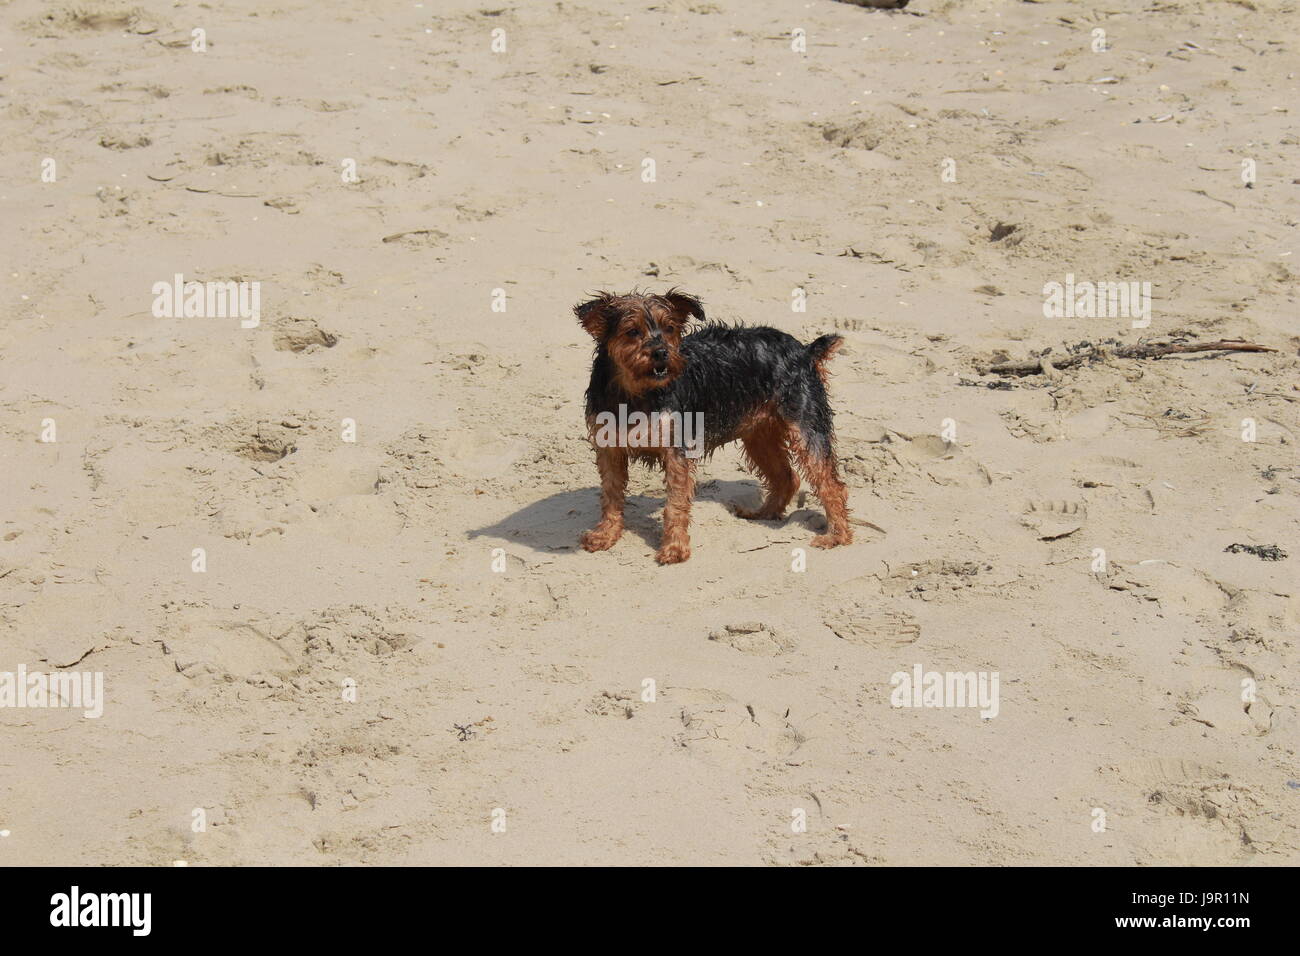 Little dog plays and barks at the beach in the sand Stock Photo